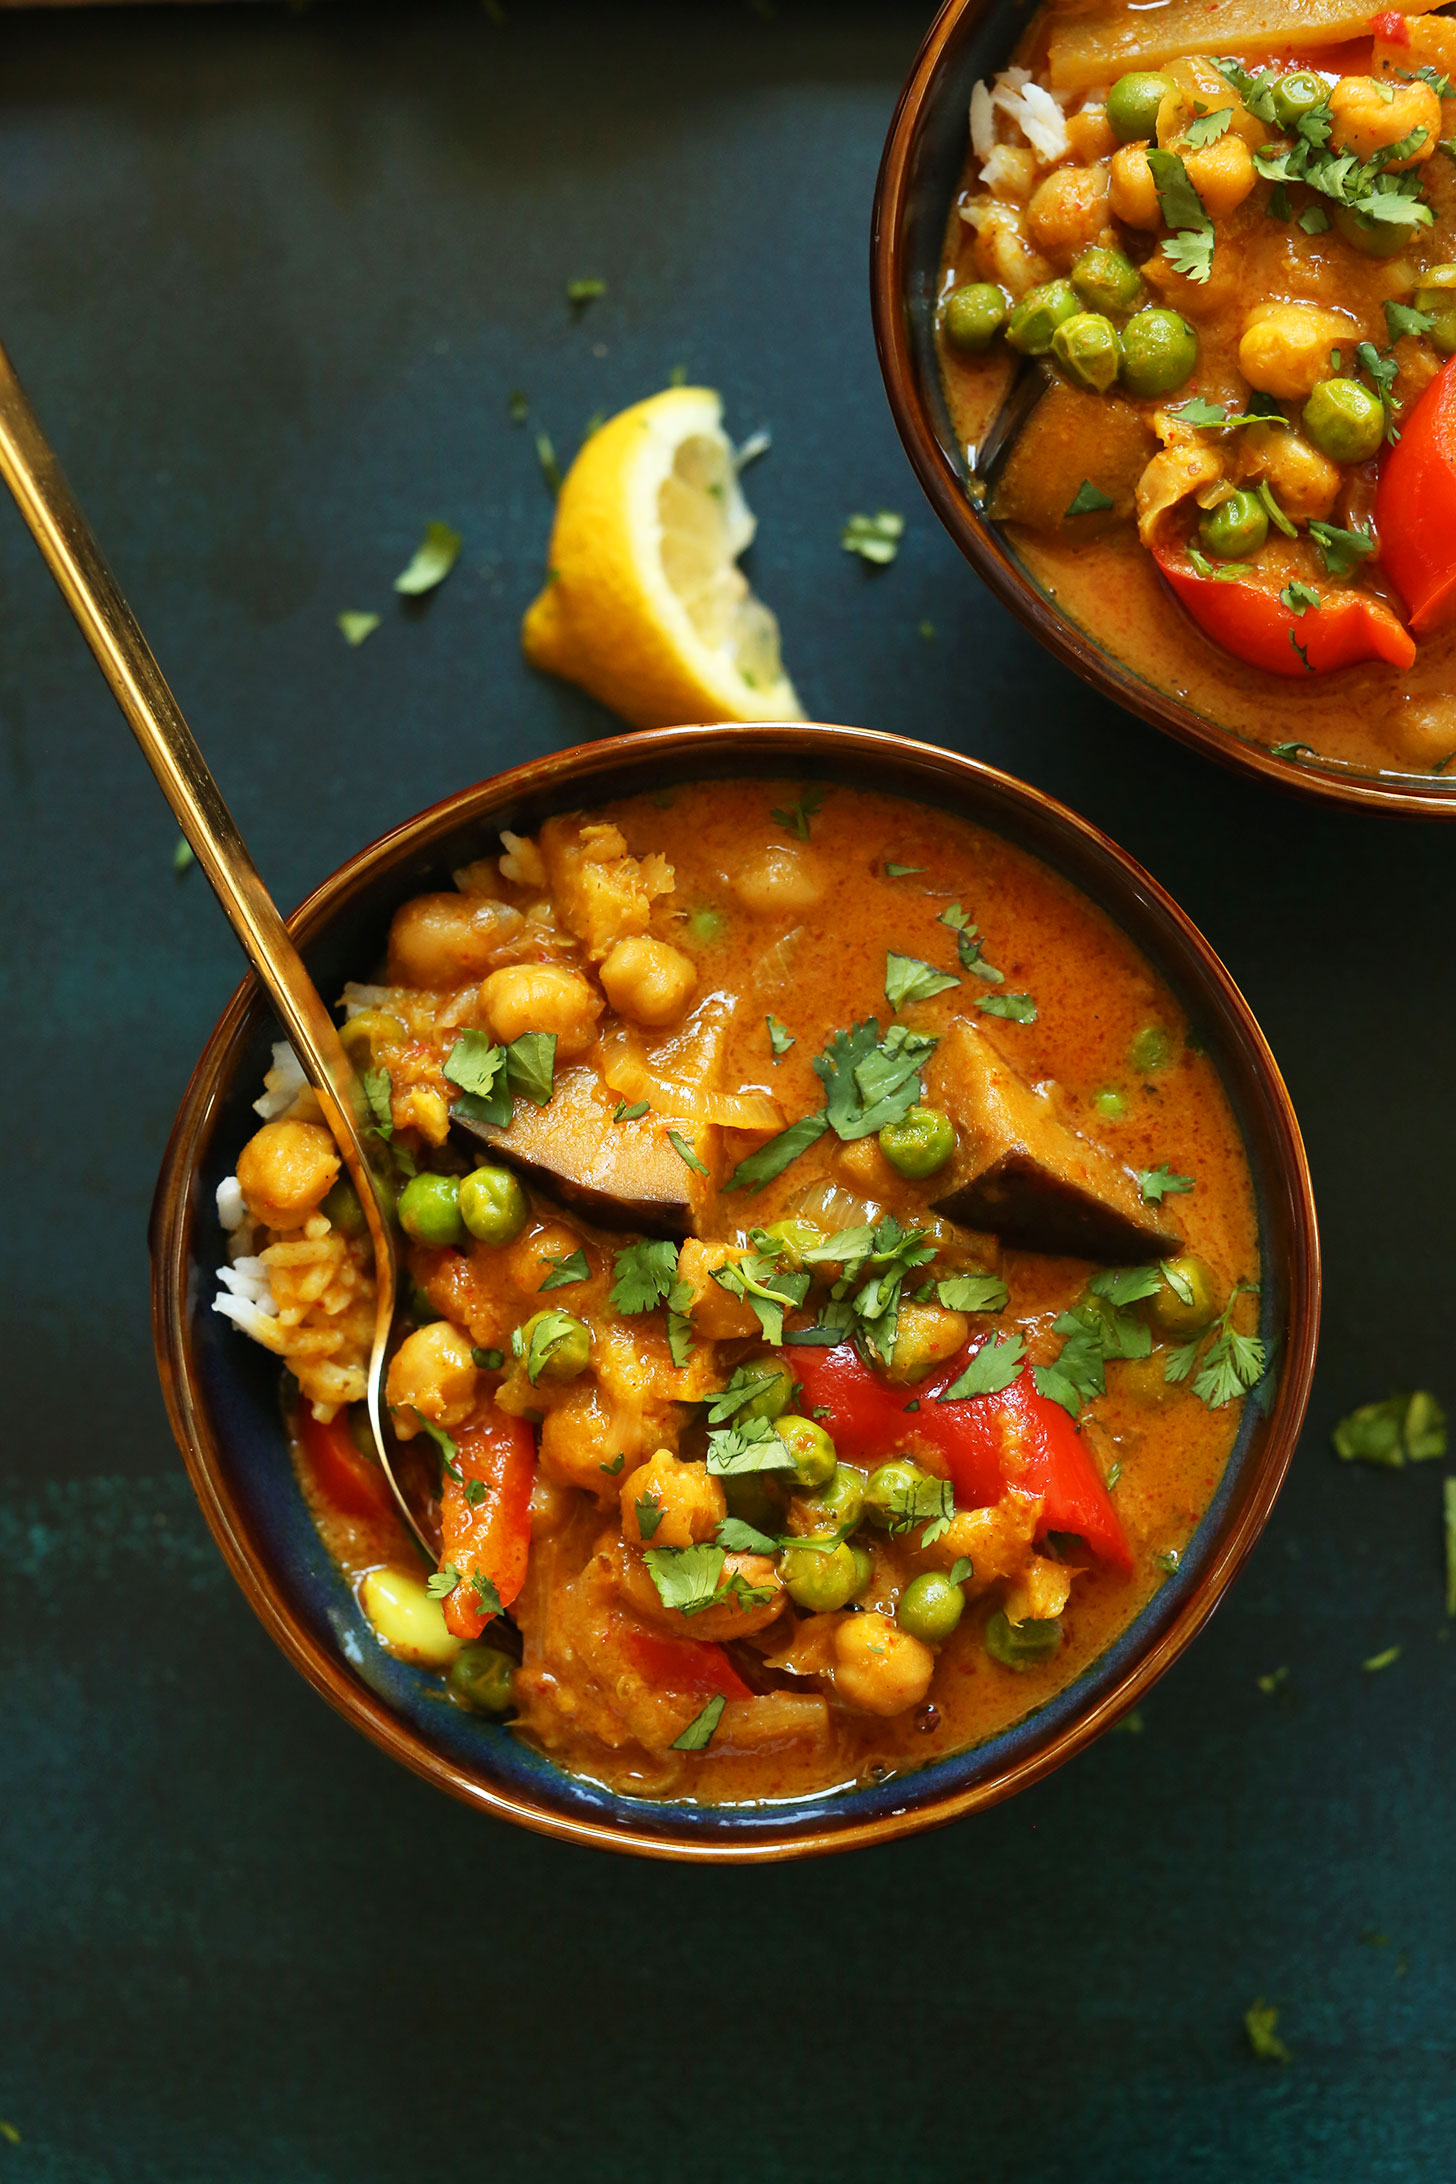 Bowl of our delicious gluten-free vegan Coconut Red Chickpea Curry